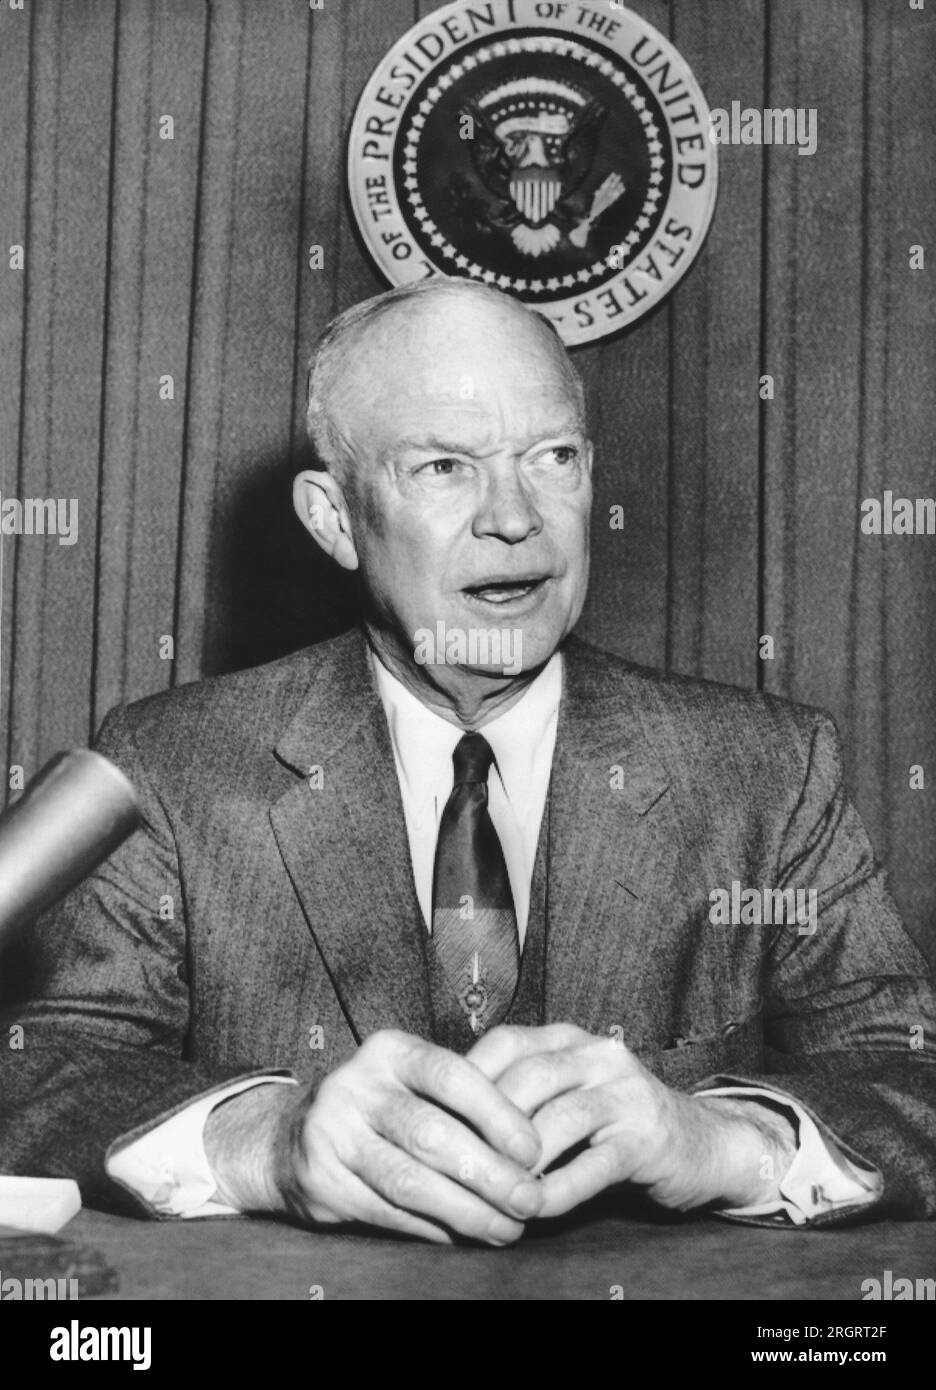 Washington, D.C.:   February 8, 1955 President Eisenhower speaking on a closed circuit television broadcast to 35 meetings throughout the country  in support of Radio Free Europe. Stock Photo